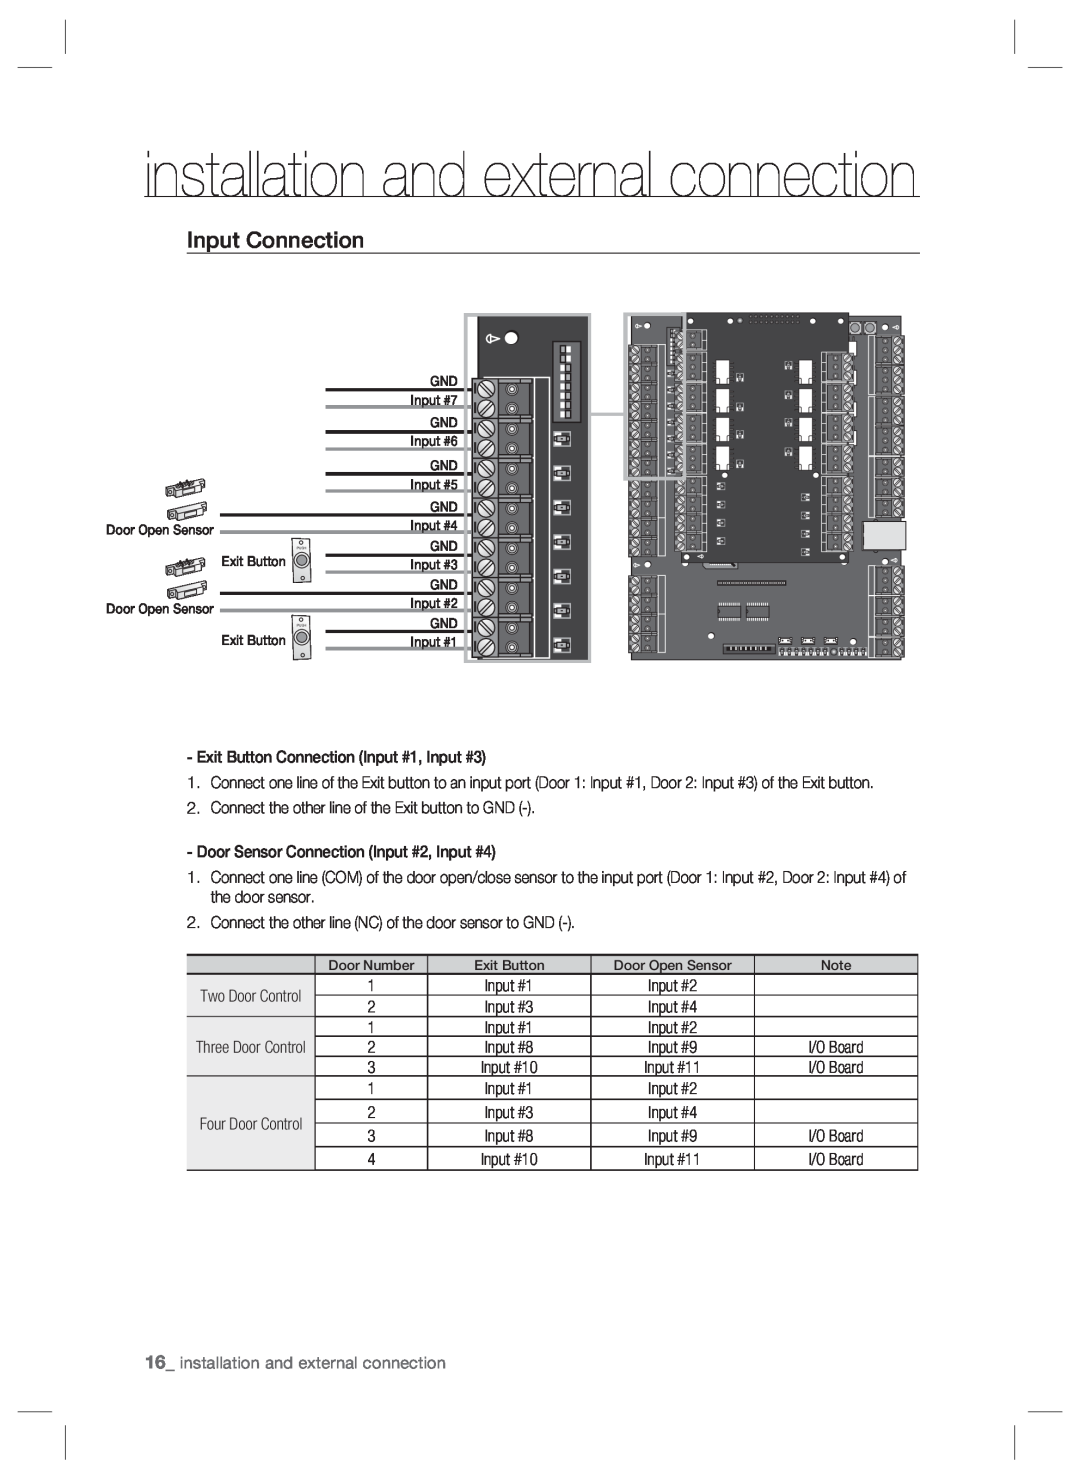 Samsung SSA-P400T, SSA-P401T user manual Input Connection, installation and external connection 